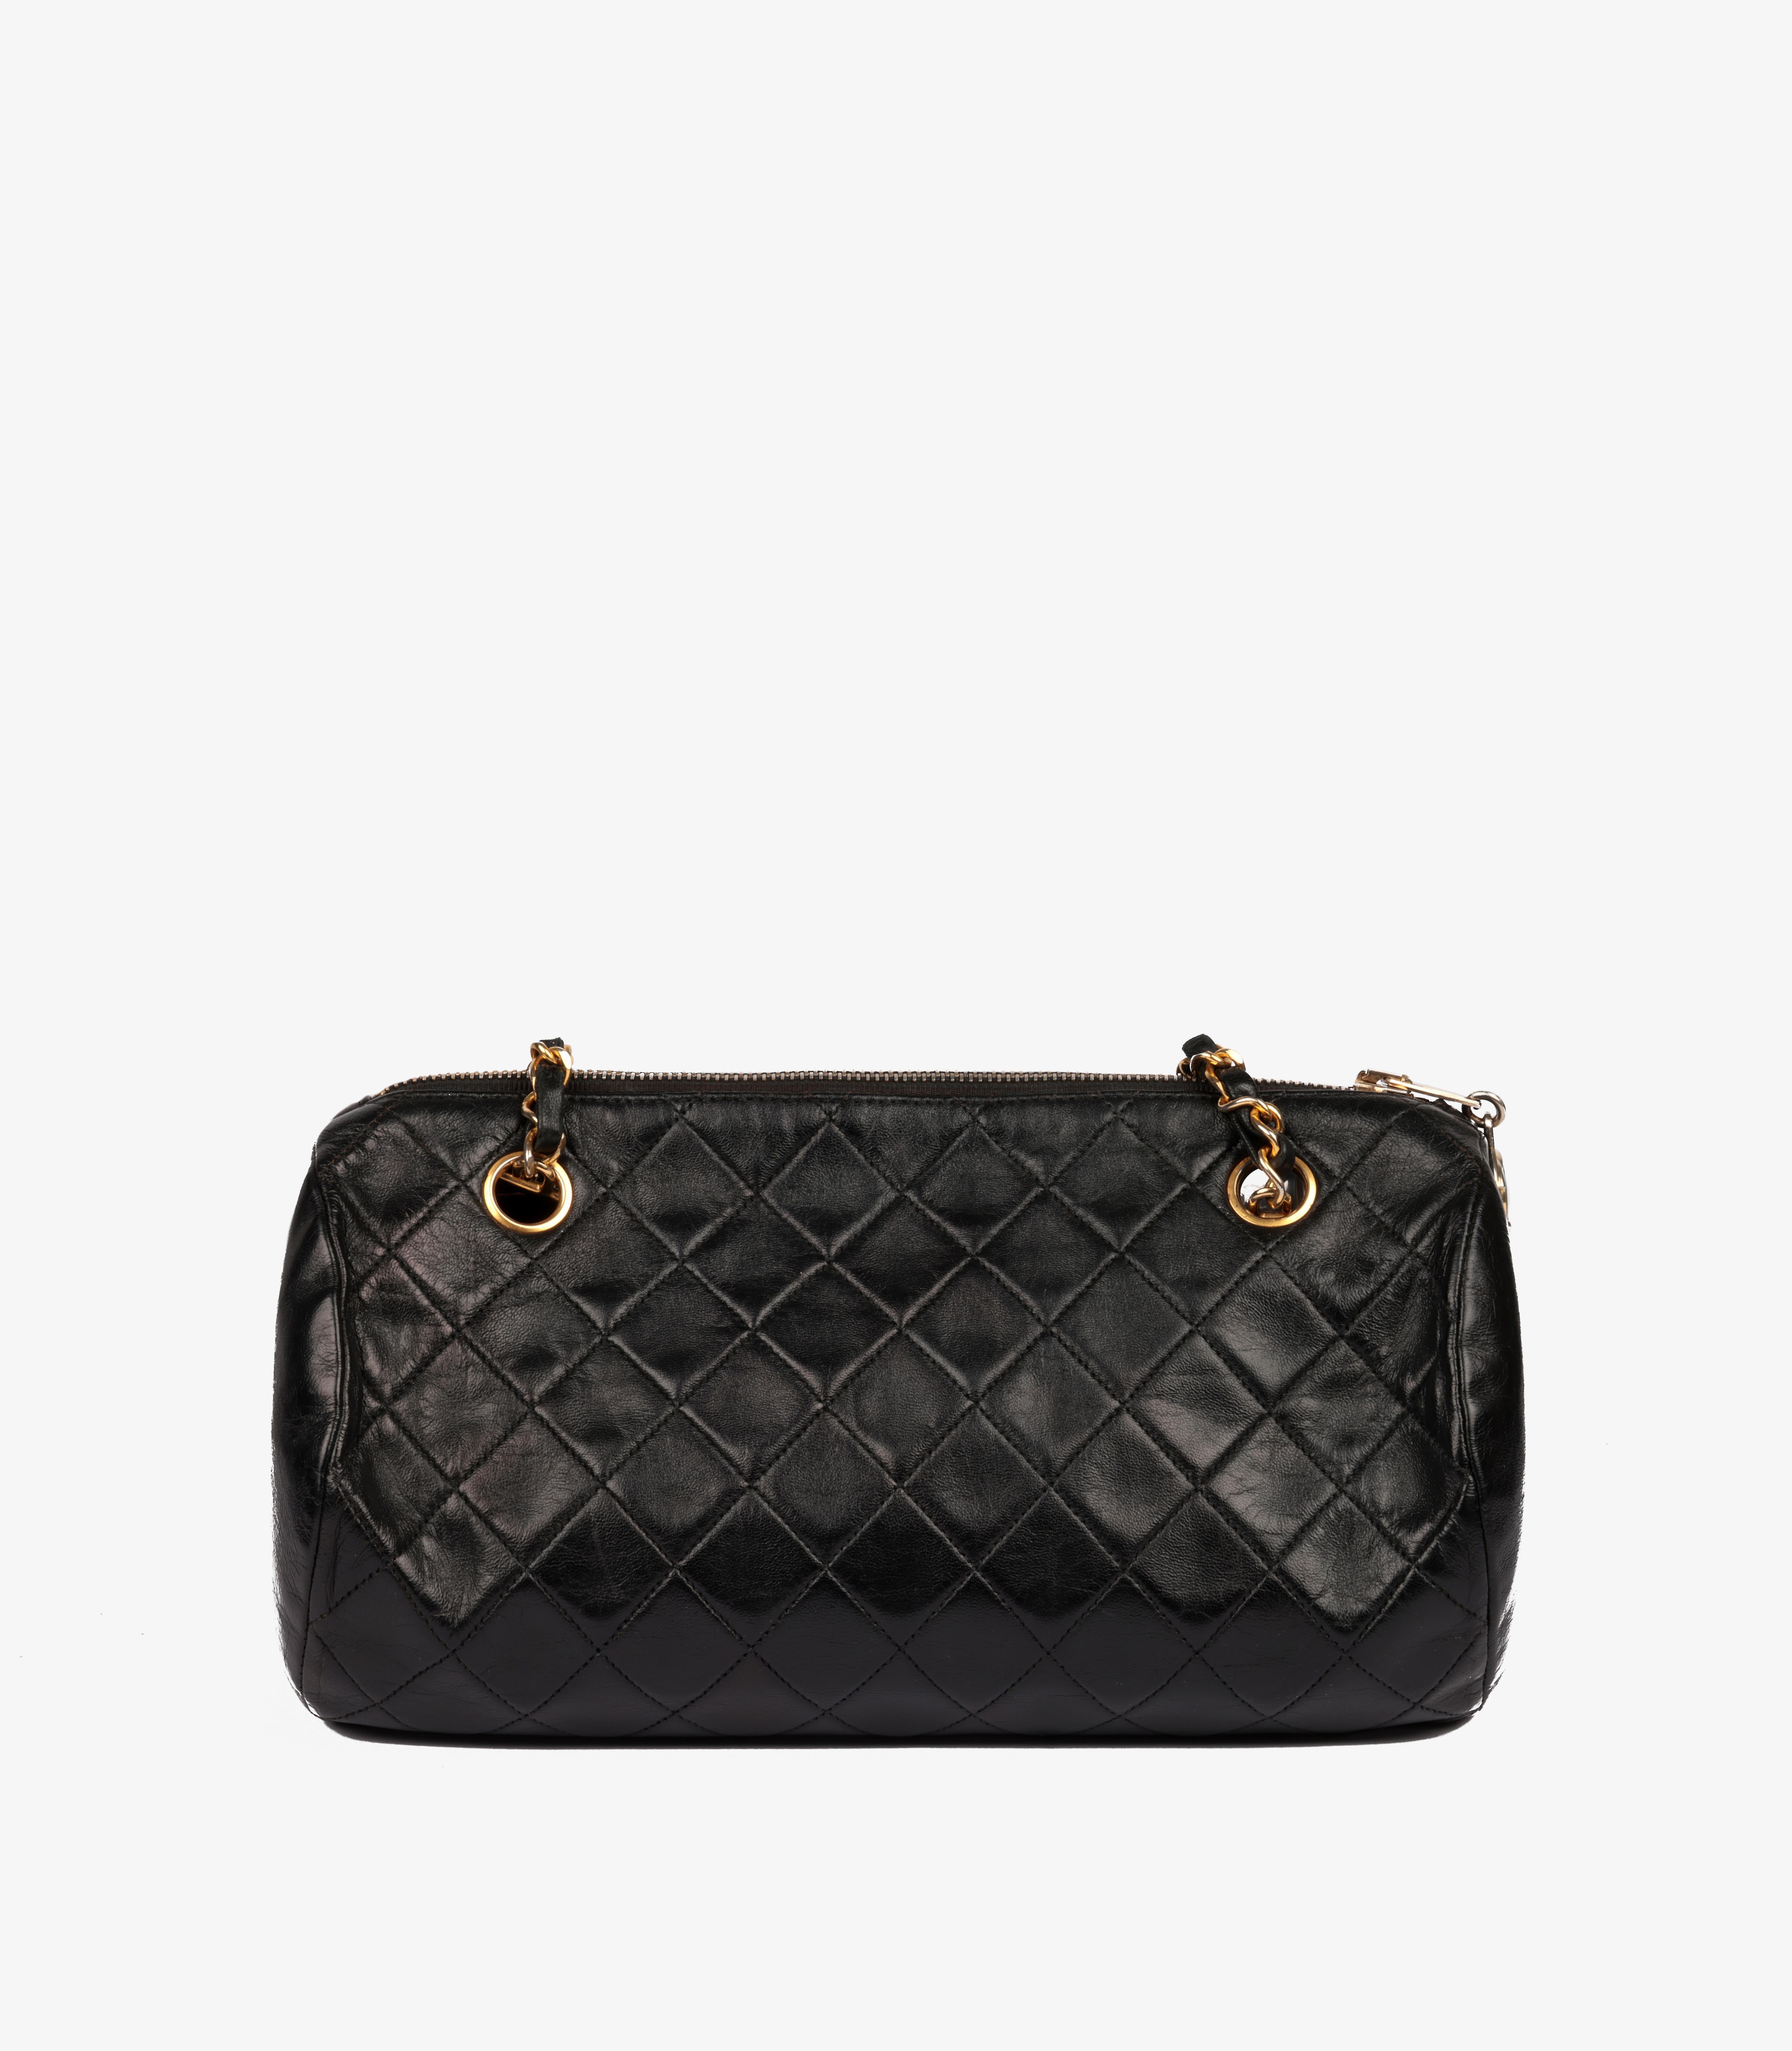 Chanel Black Quilted Lambskin Vintage Bowling Bag 2